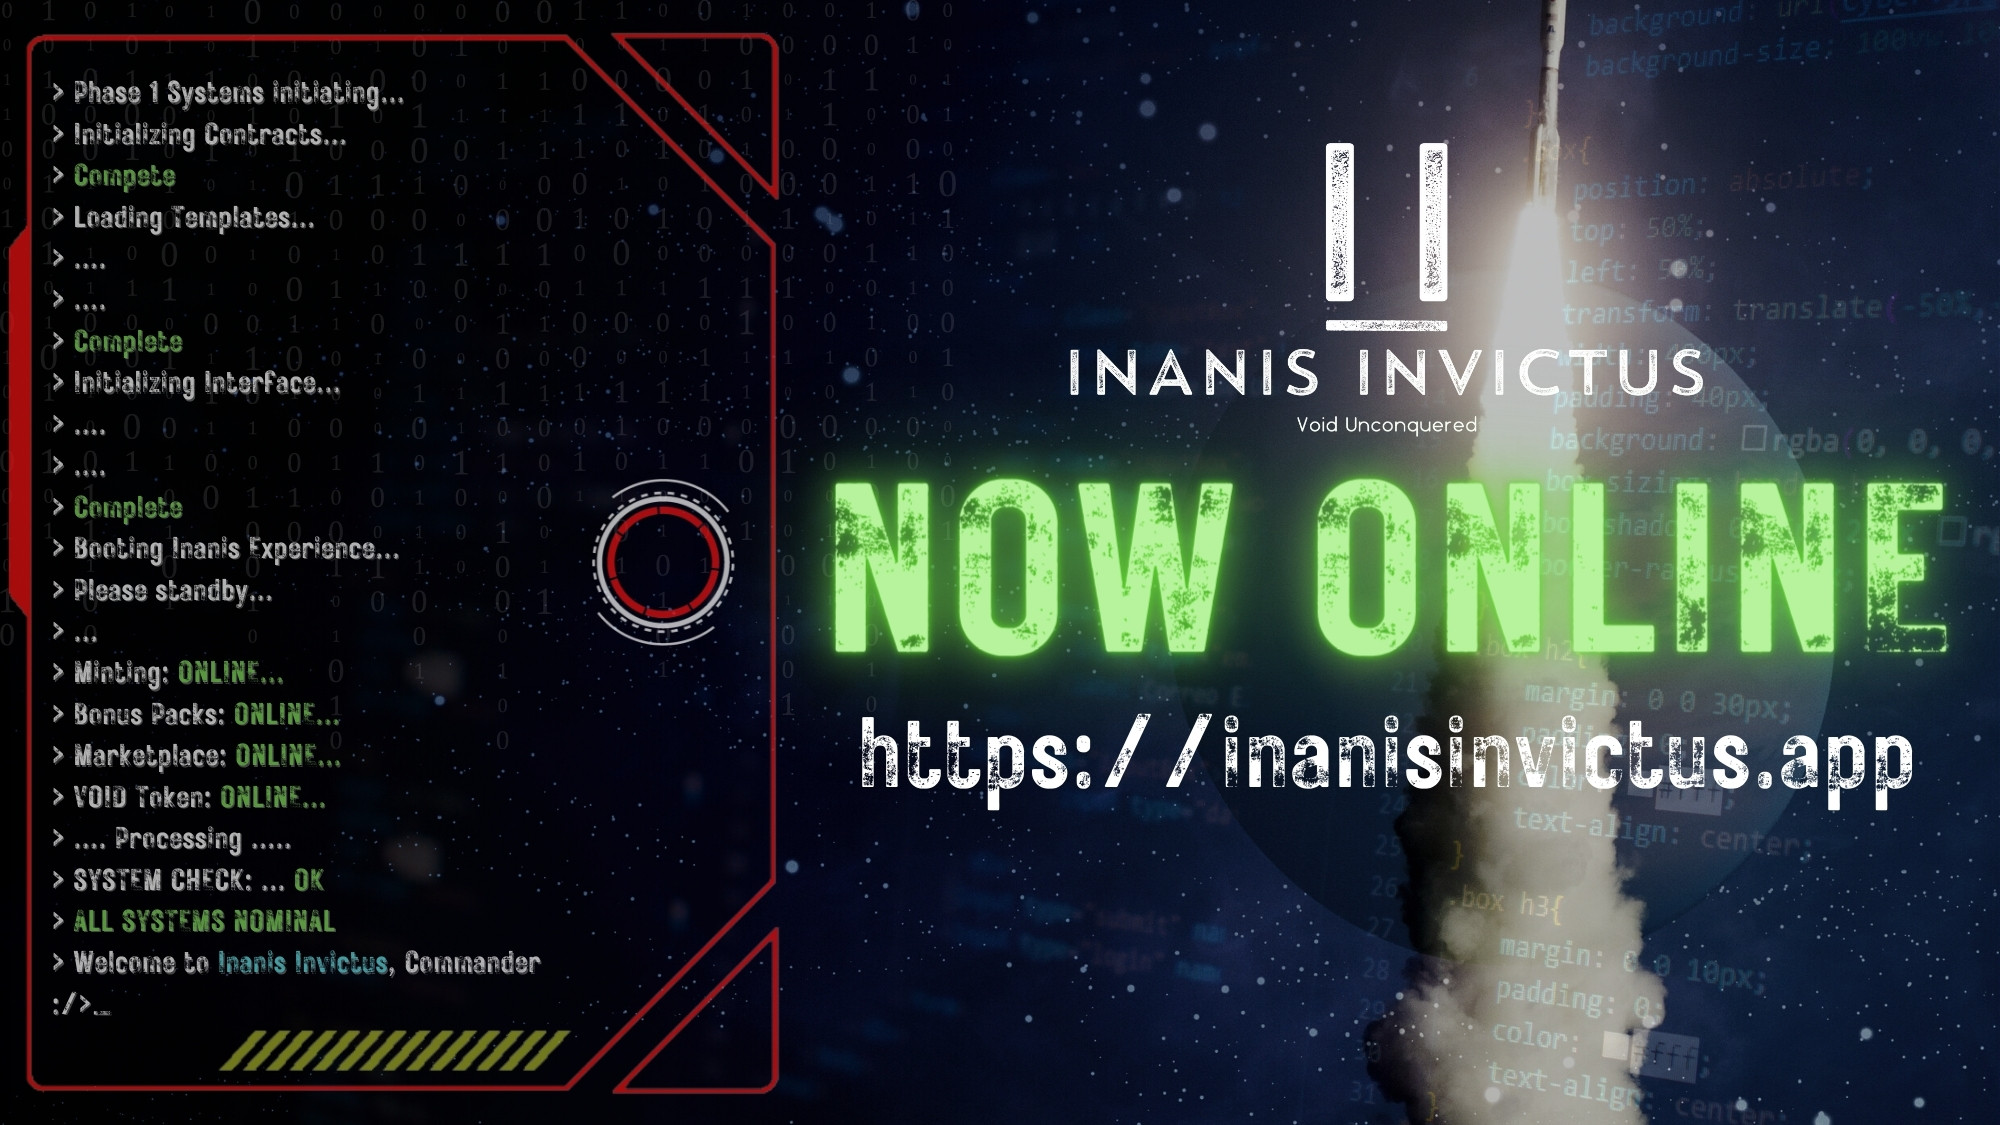 Inanis Invictus is now LIVE!